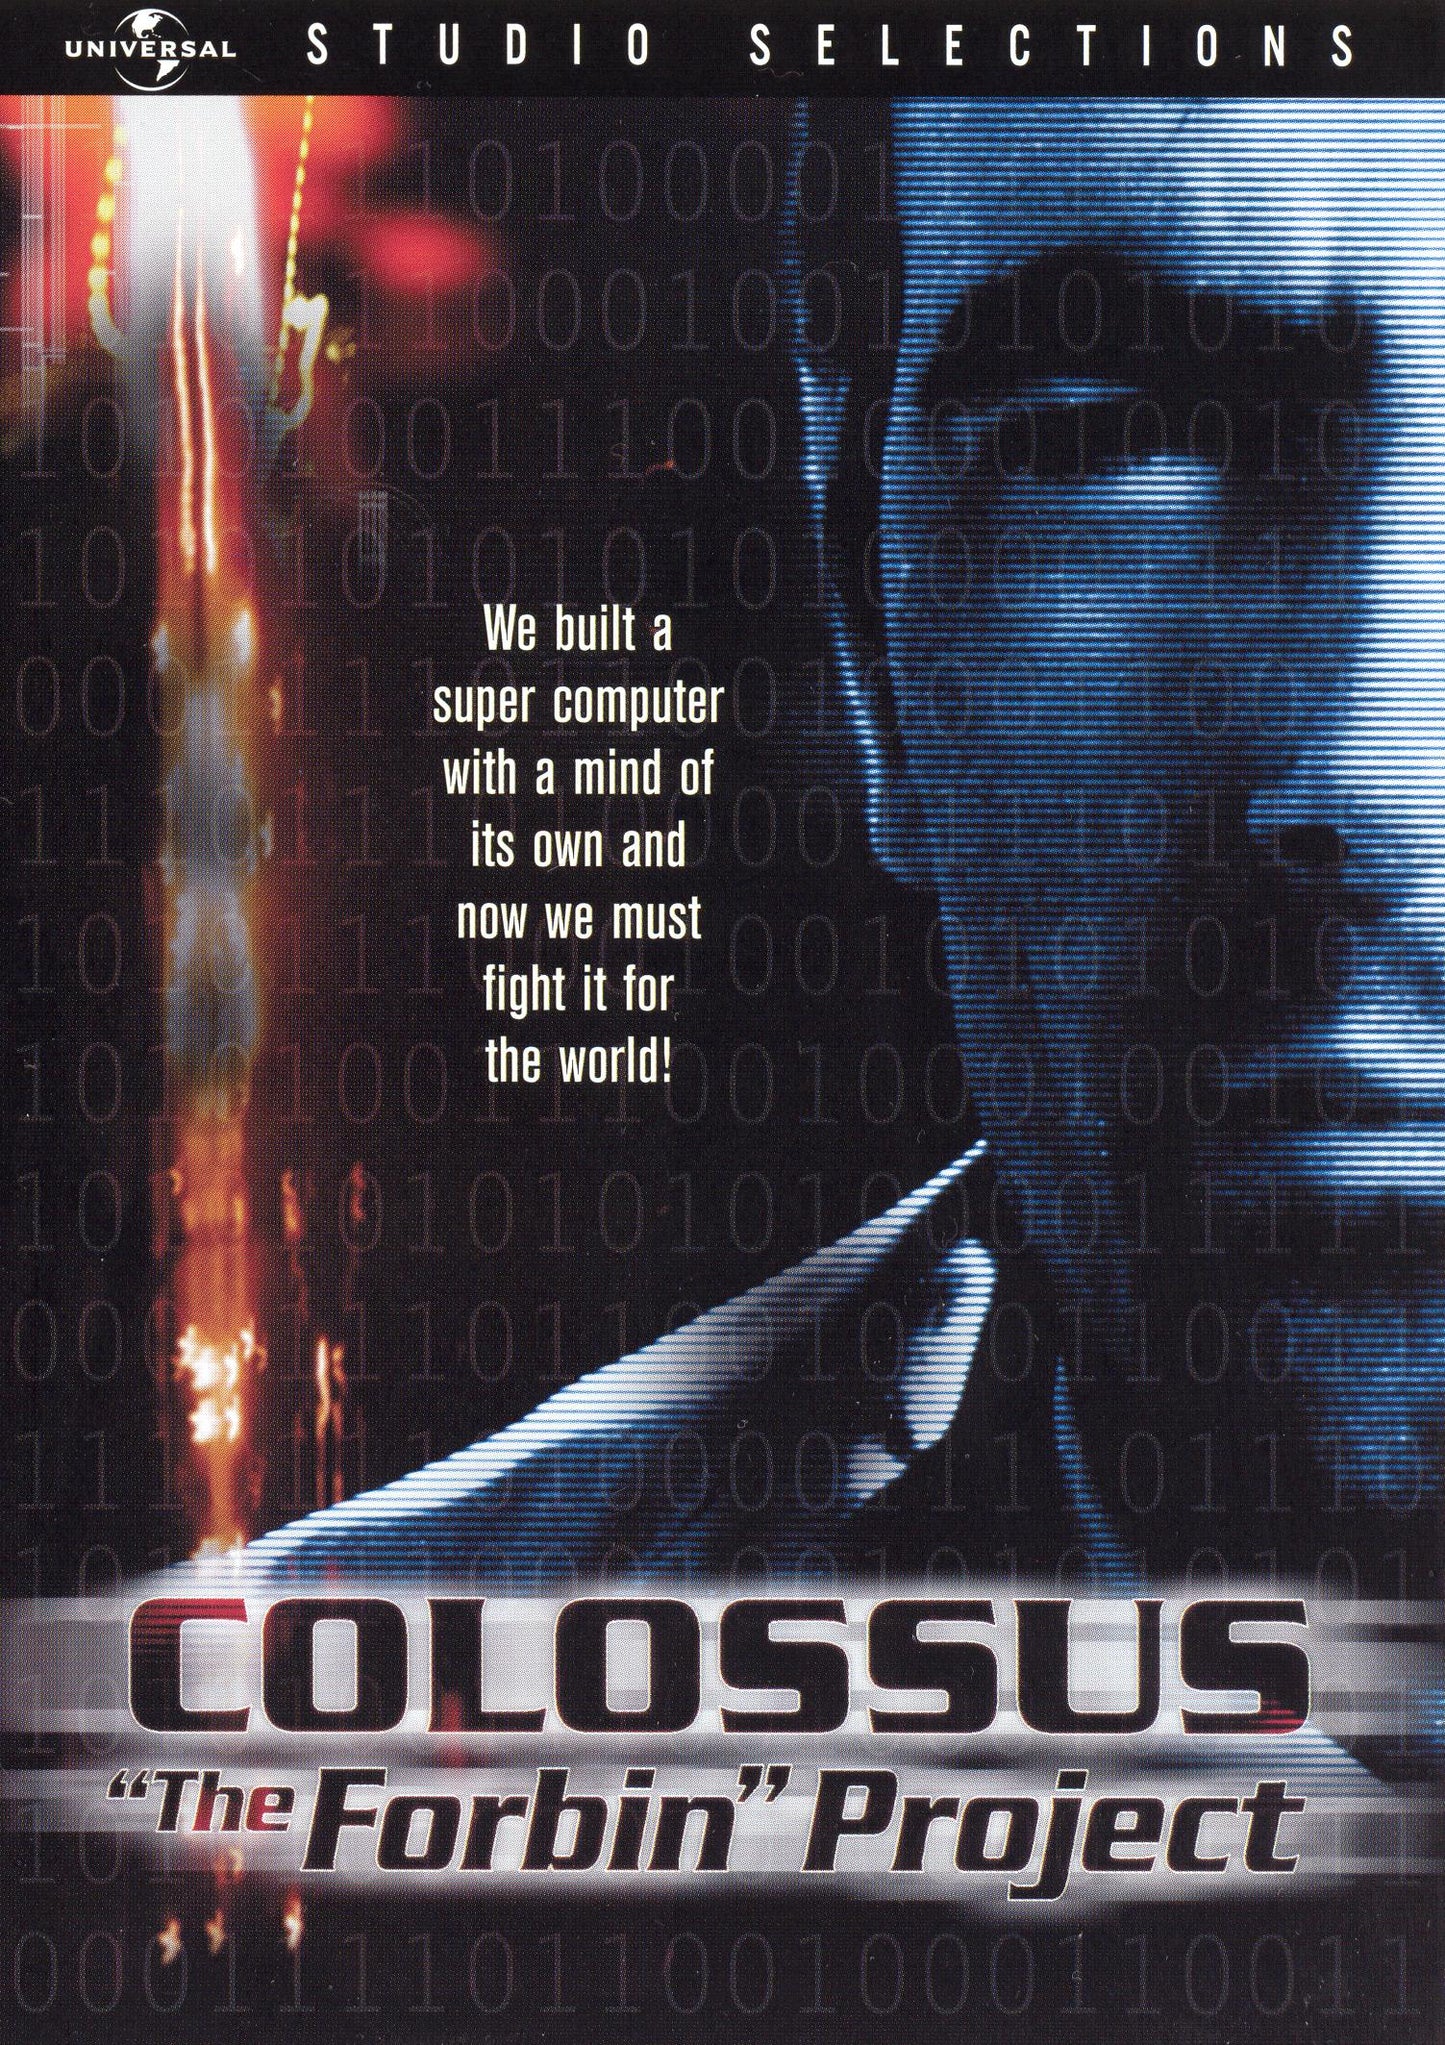 Colossus: "The Forbin" Project cover art